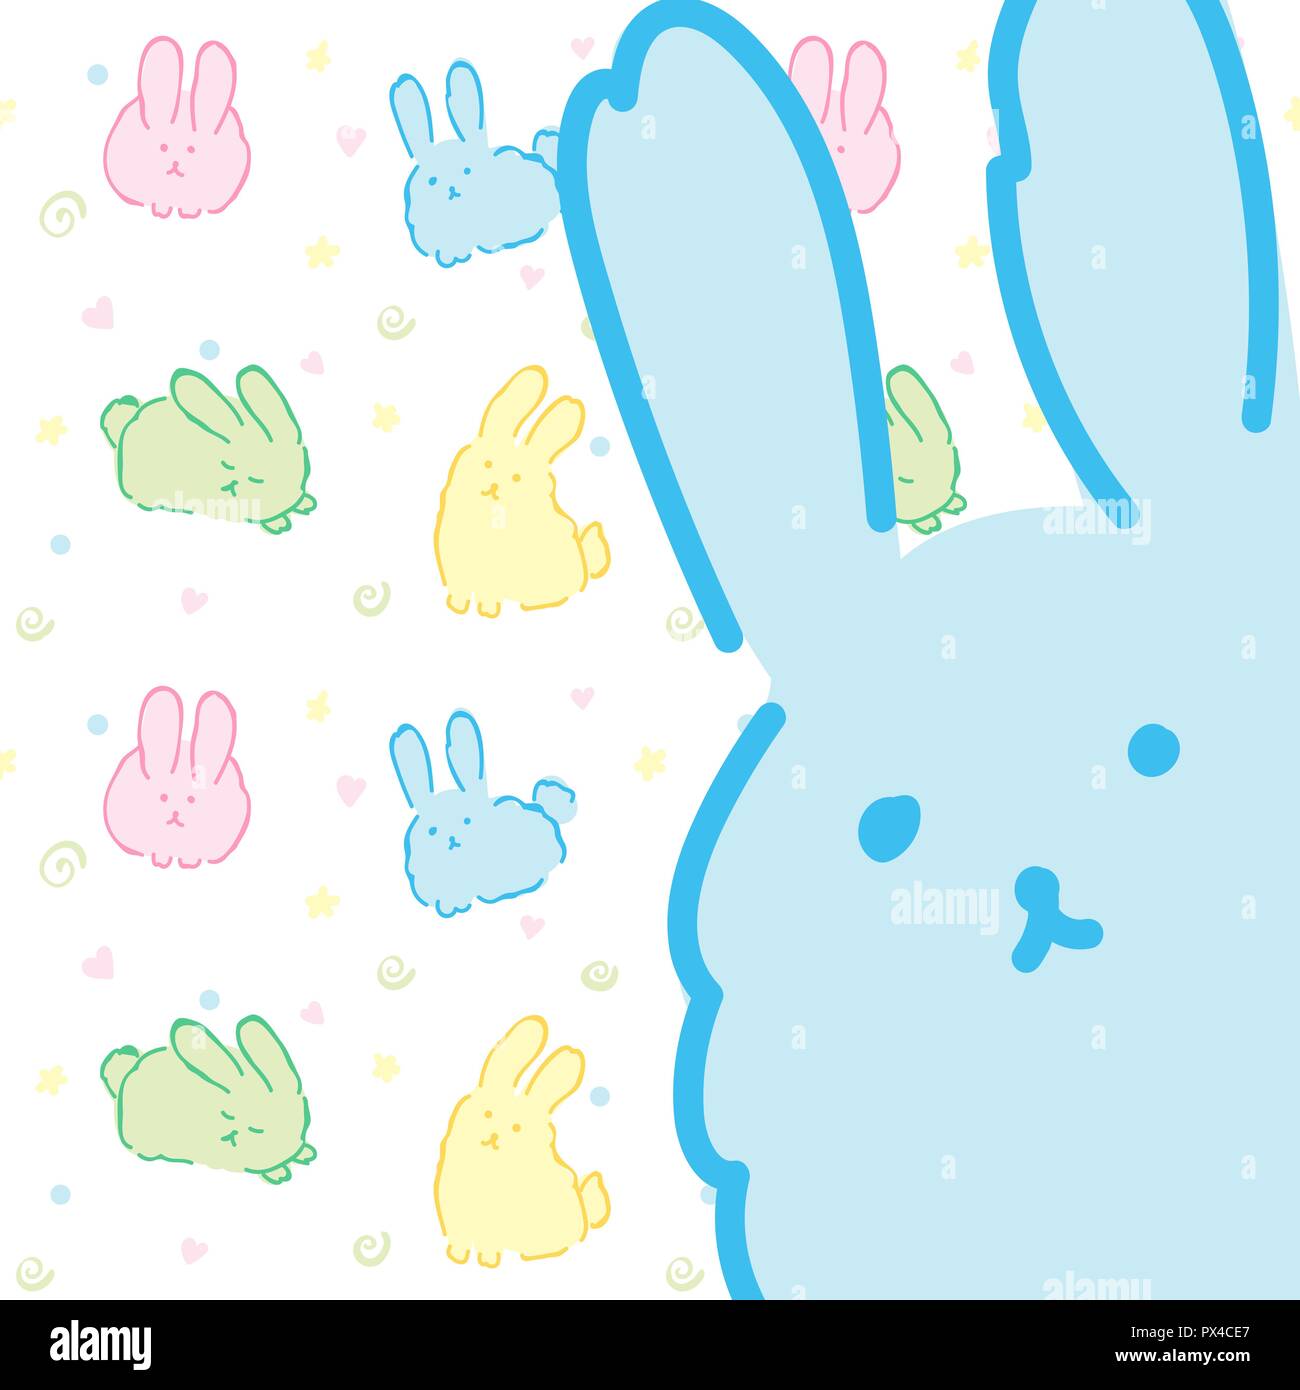 Bunnies Background Card With Pattern Cute Rabbits Fluffy Kawaii